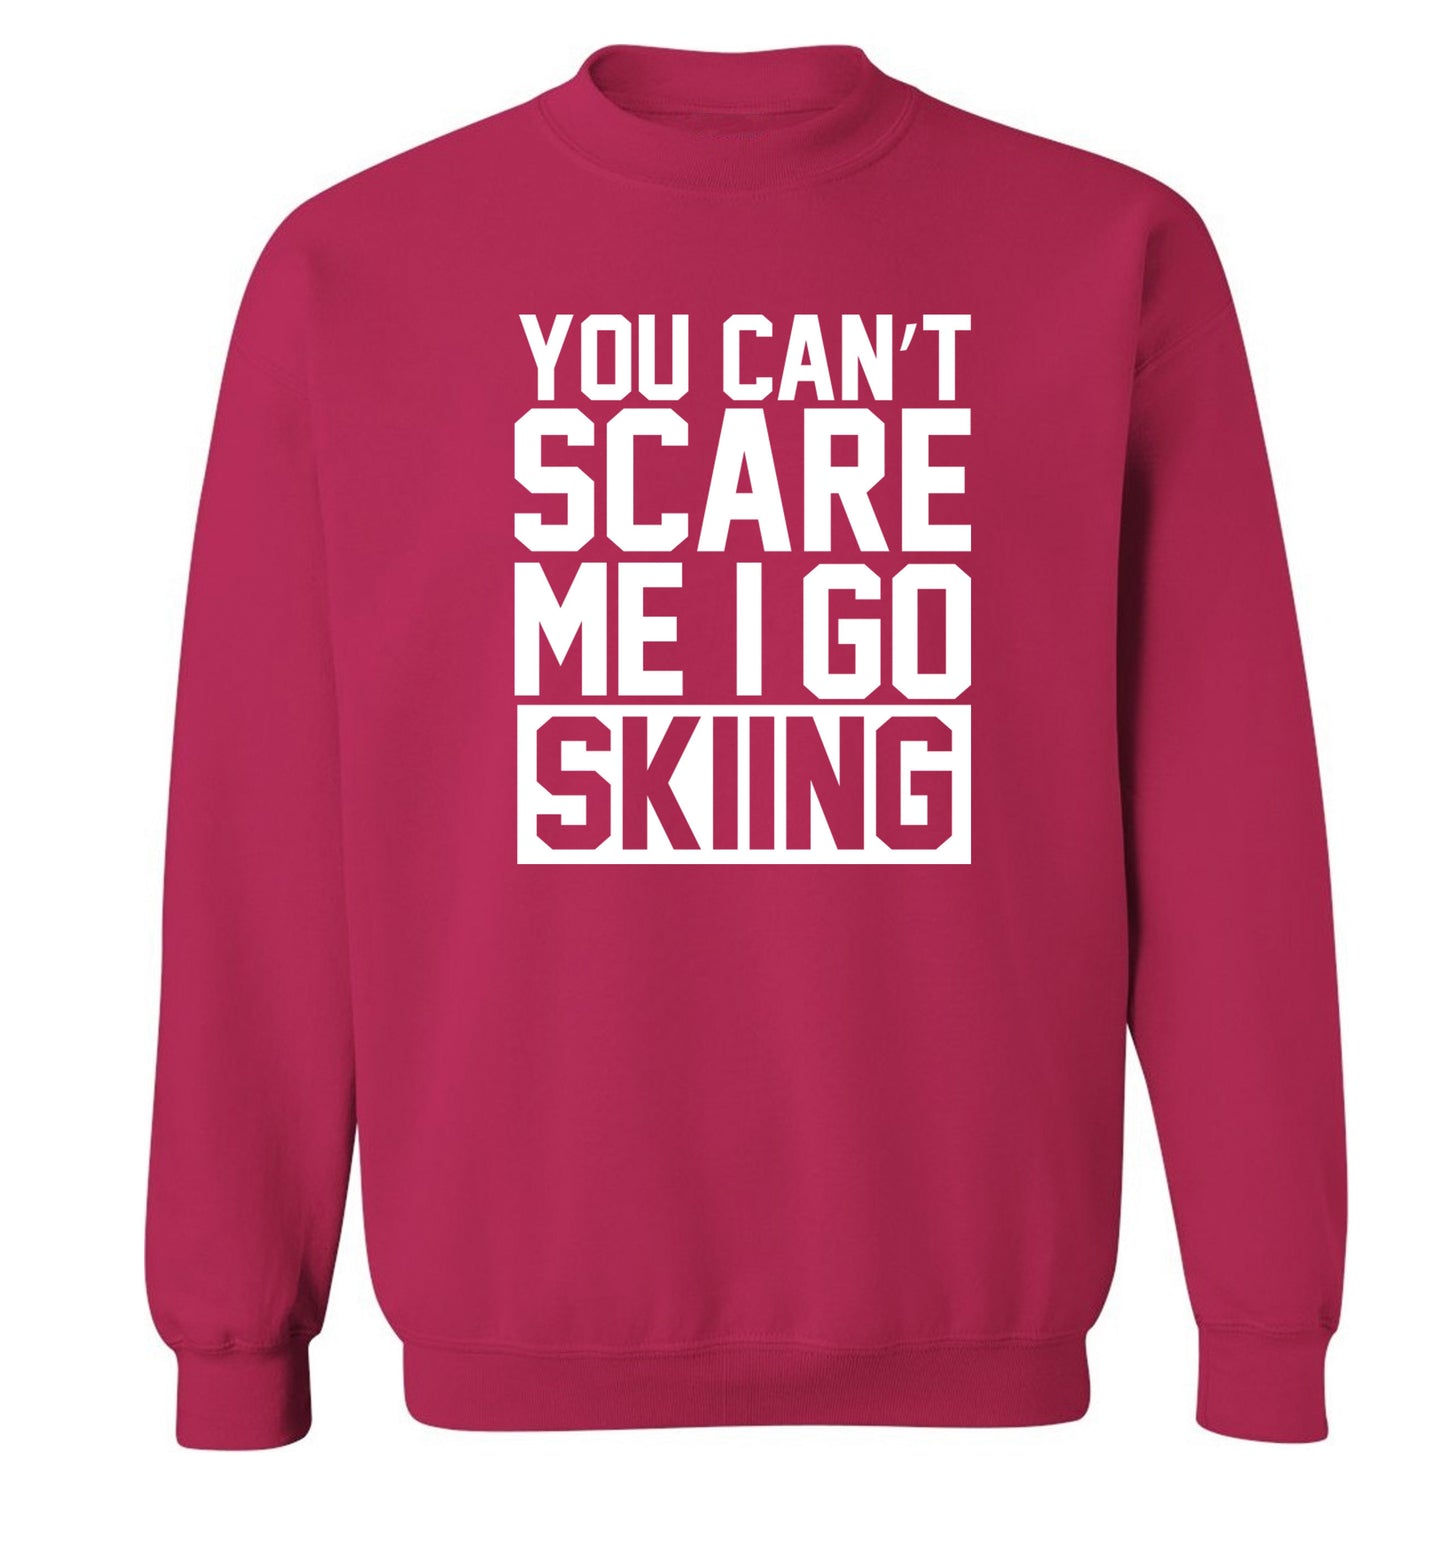 You can't scare me I go skiing Adult's unisex pink Sweater 2XL